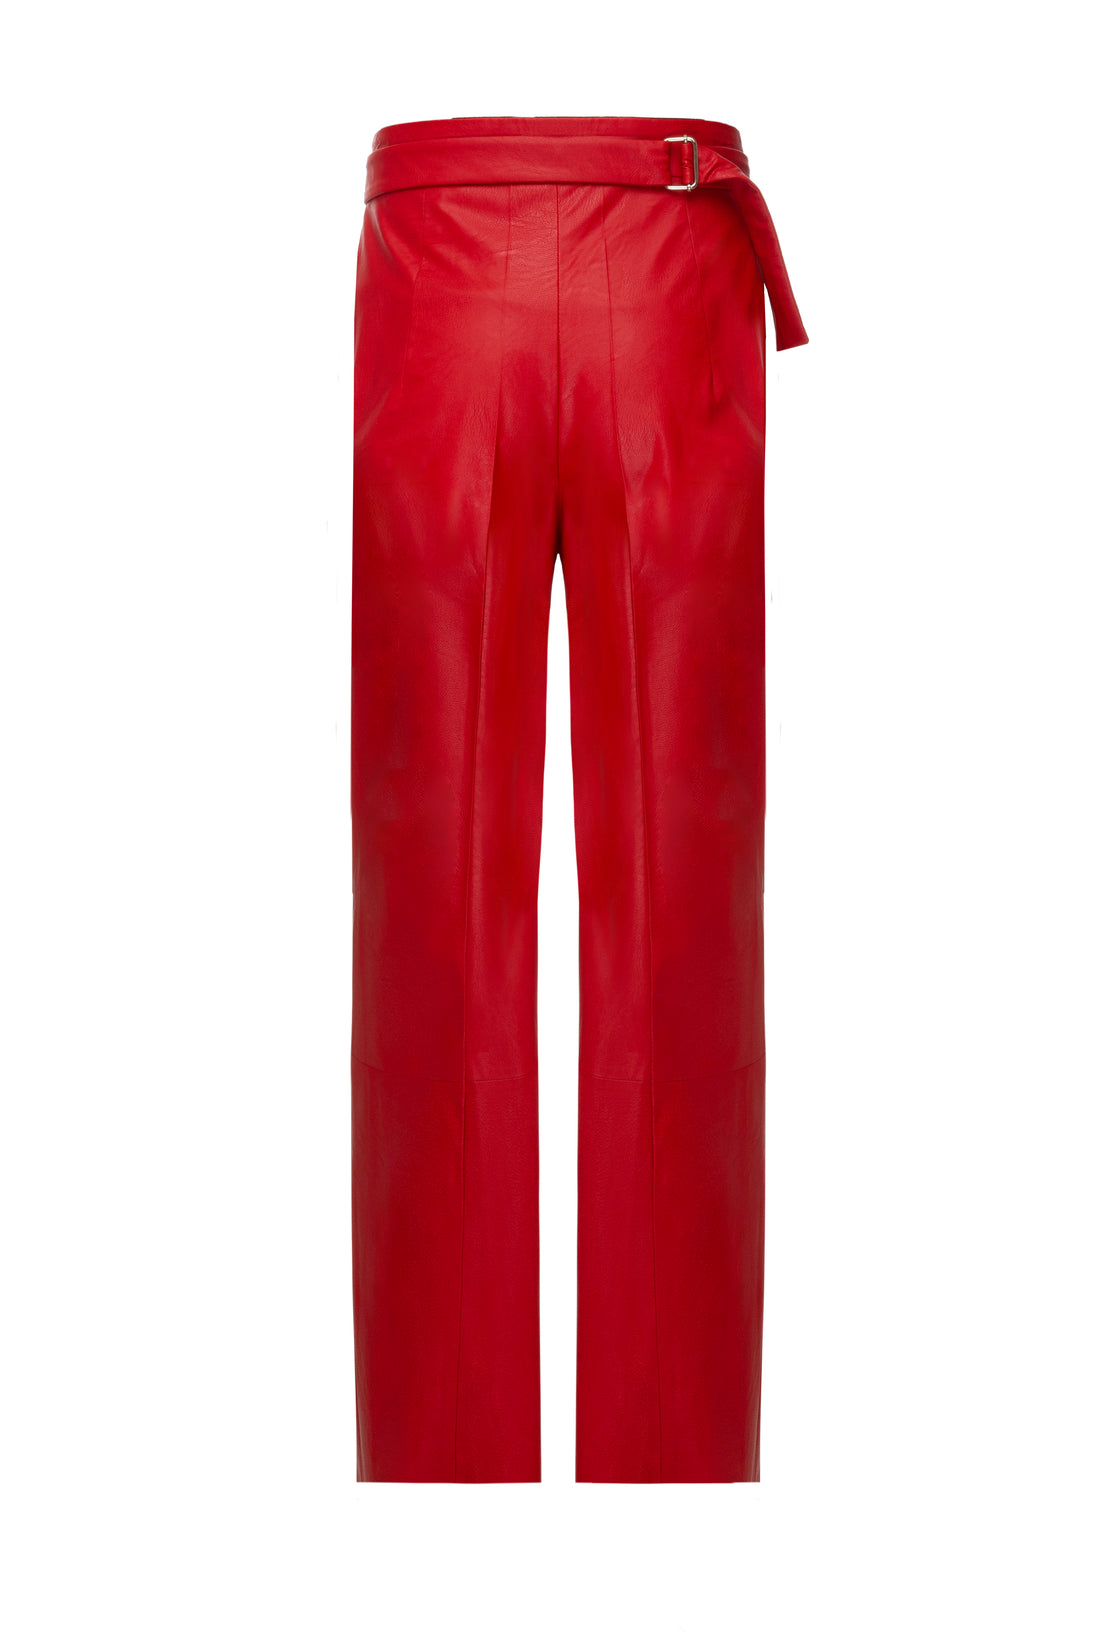 SITUATIONIST Red Pants in Vegan Leather